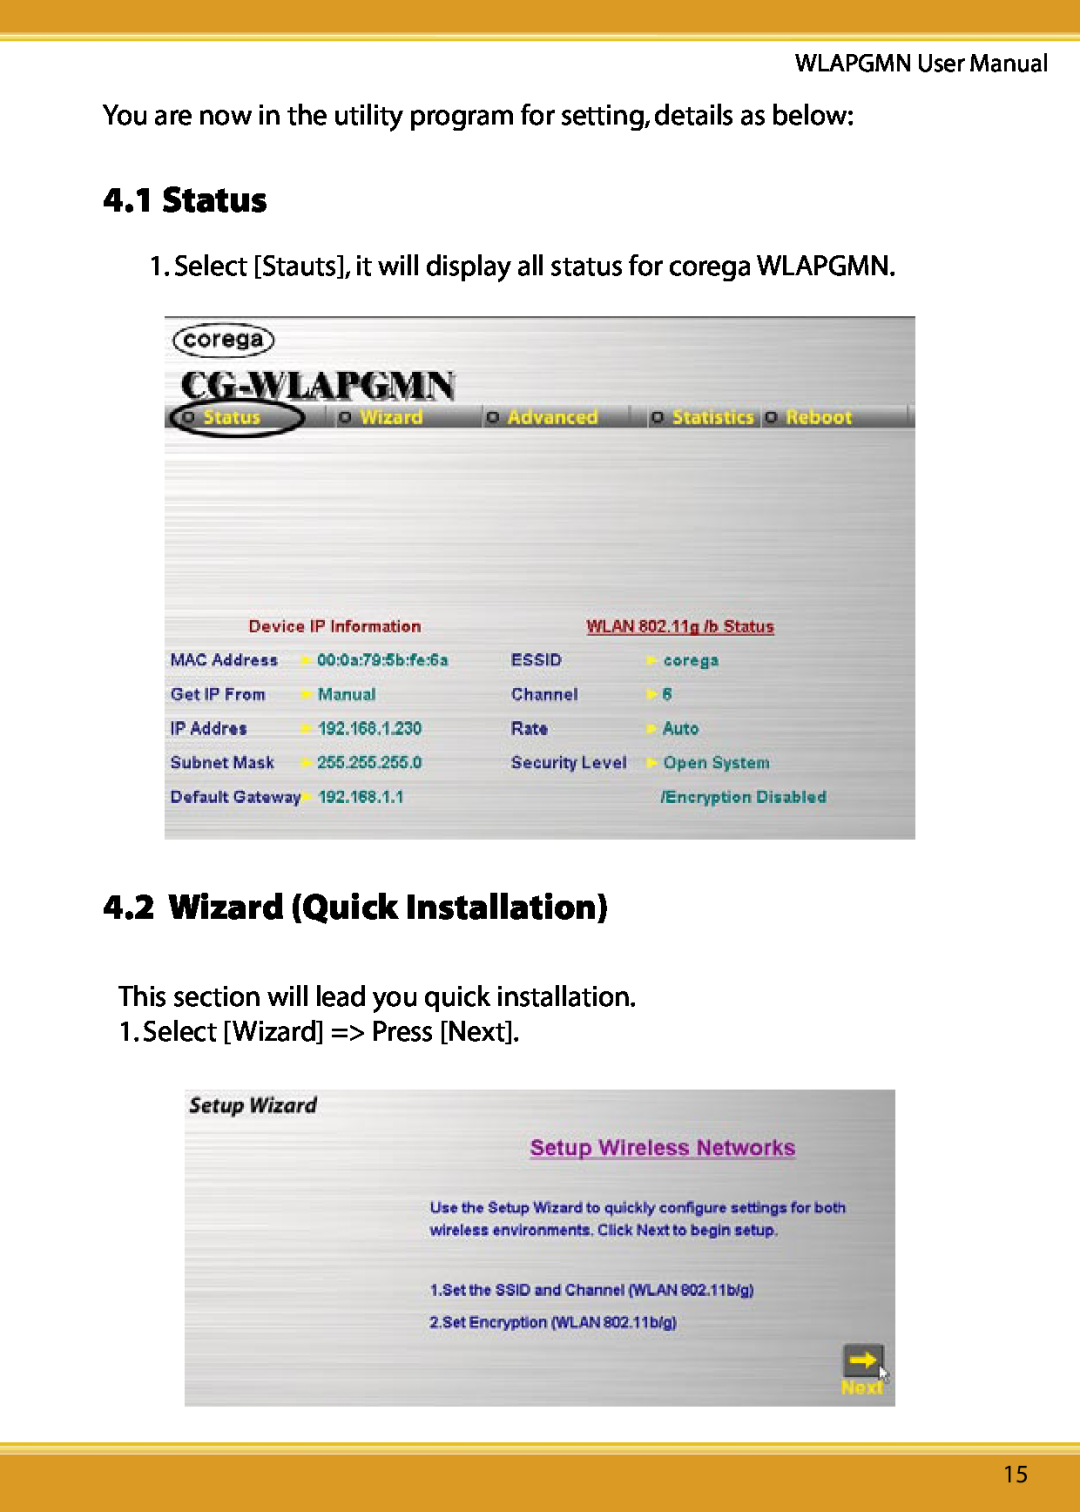 Corega CG-WLAPGMN Status, Wizard Quick Installation, You are now in the utility program for setting, details as below 